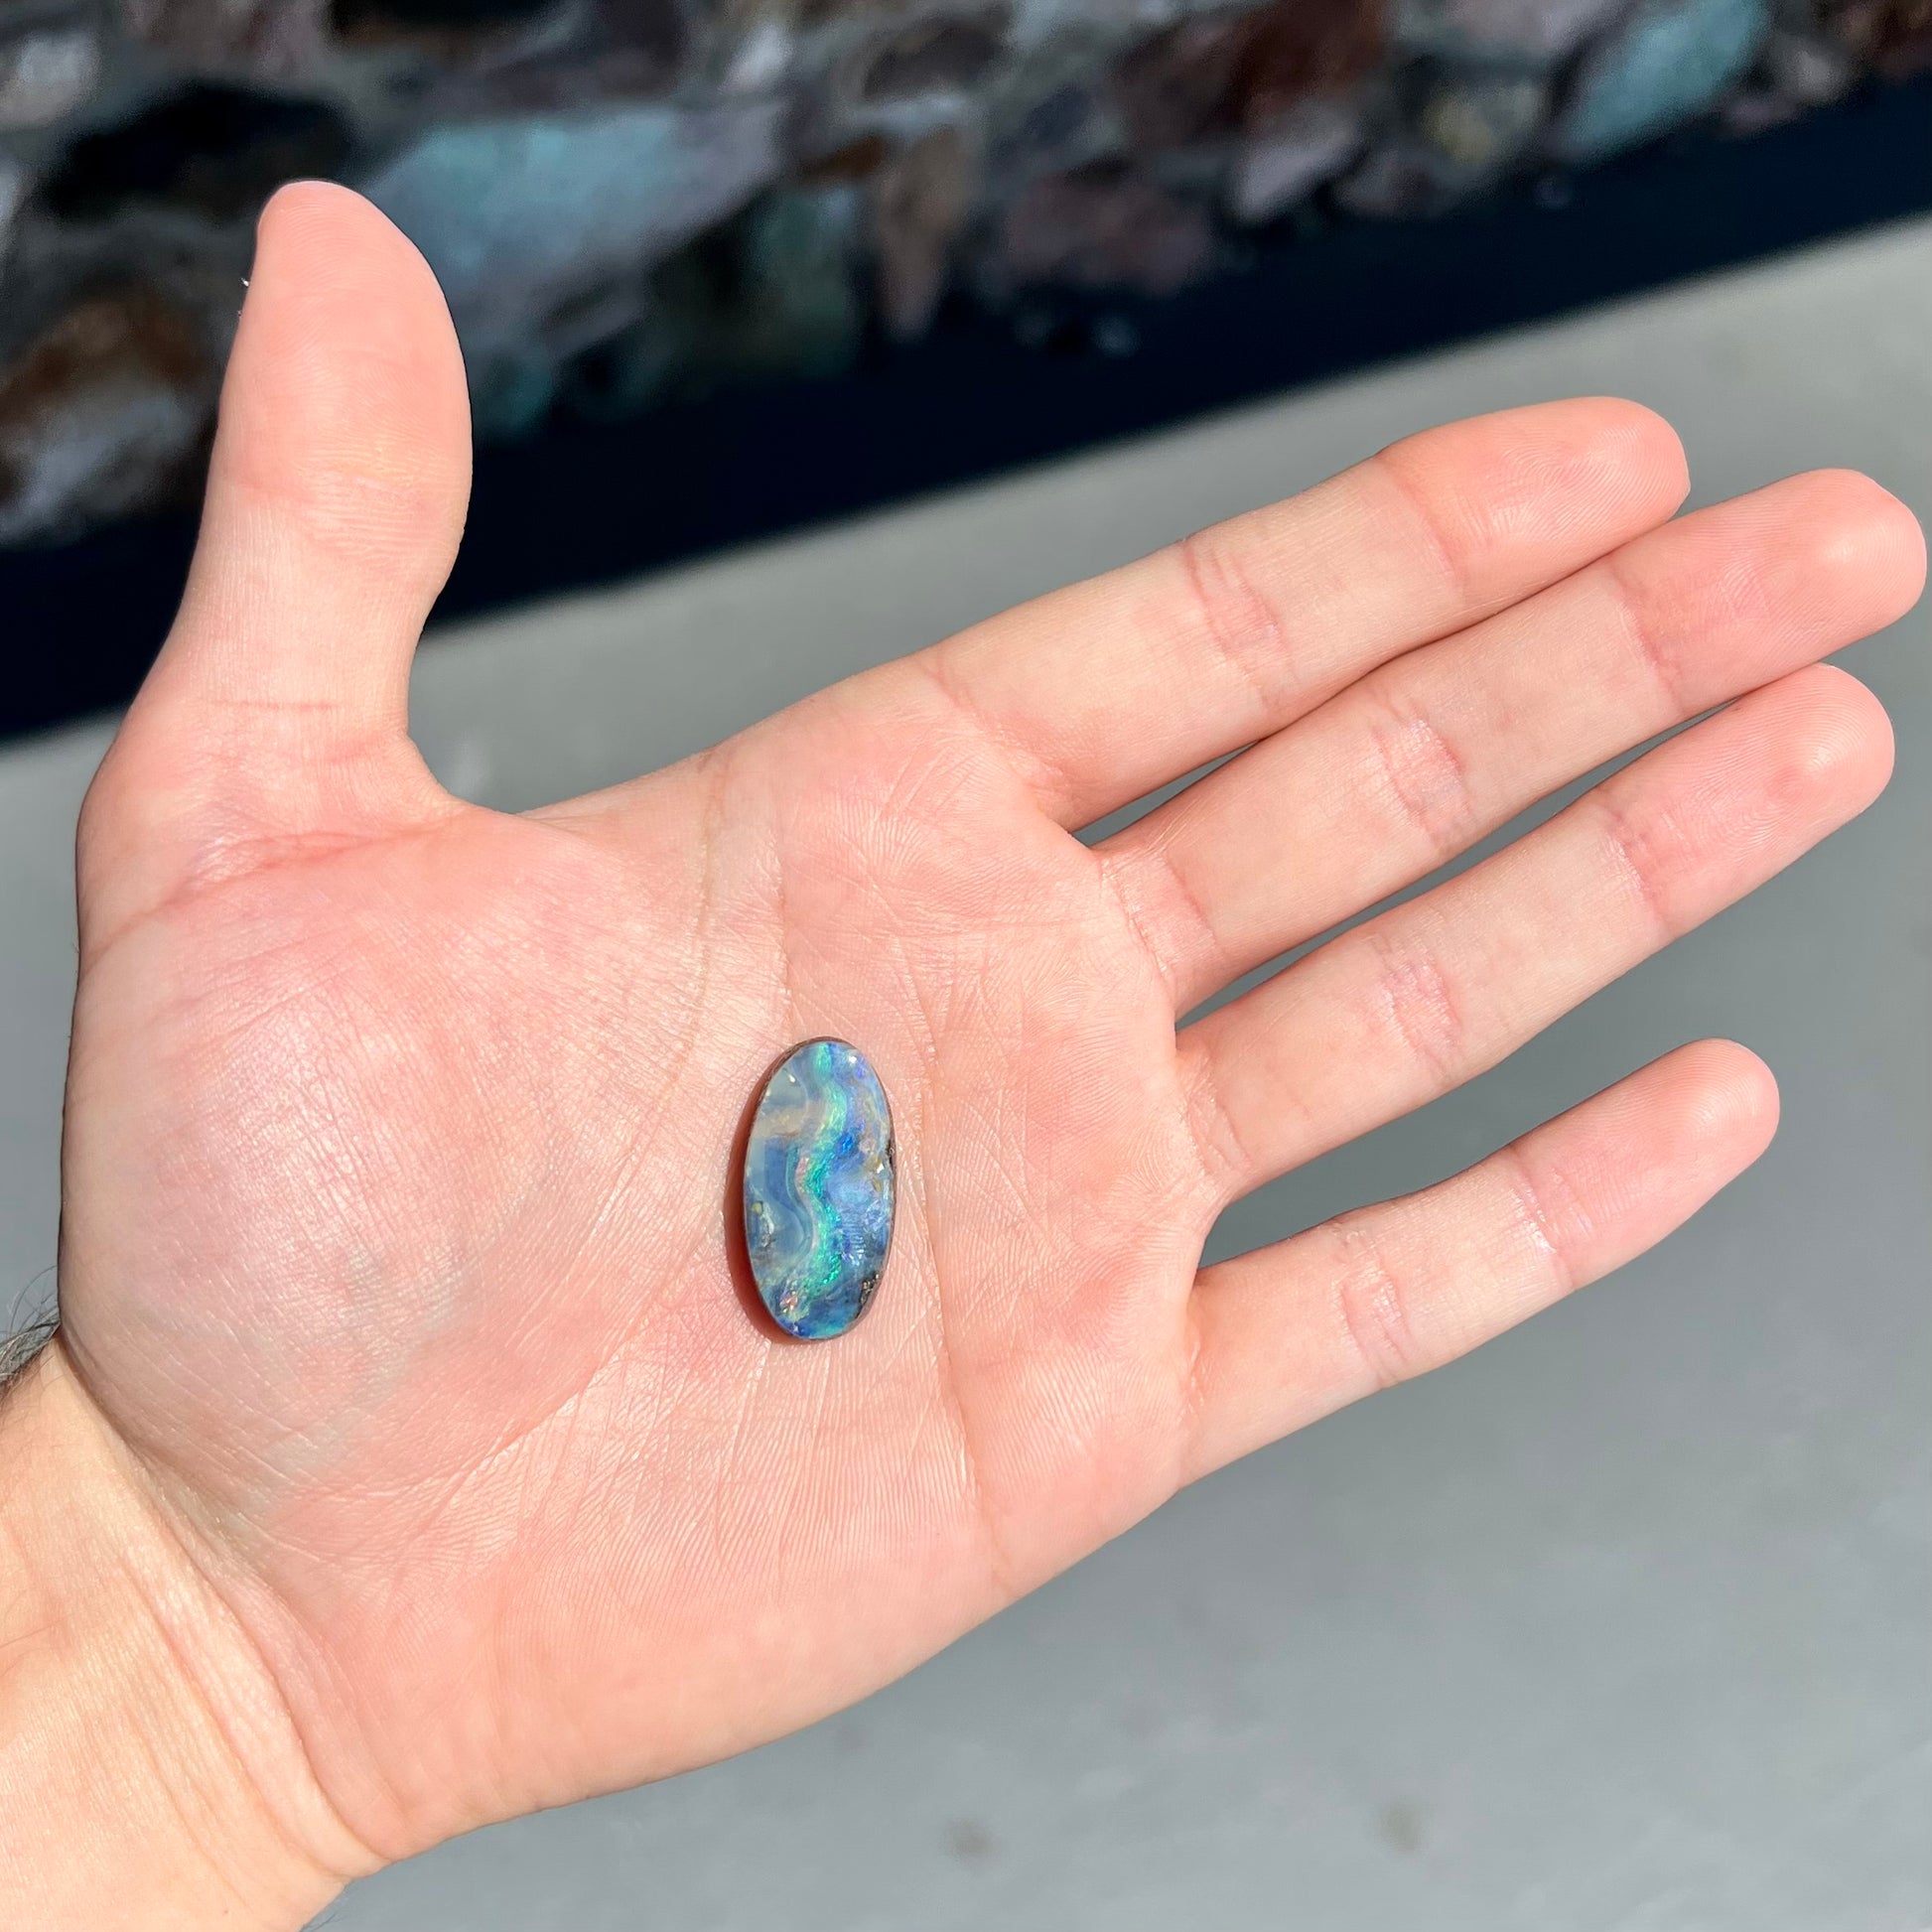 A loose, oval cabochon cut Quilpie boulder opal from Queensland, Australia.  The stone is blue with green fire.